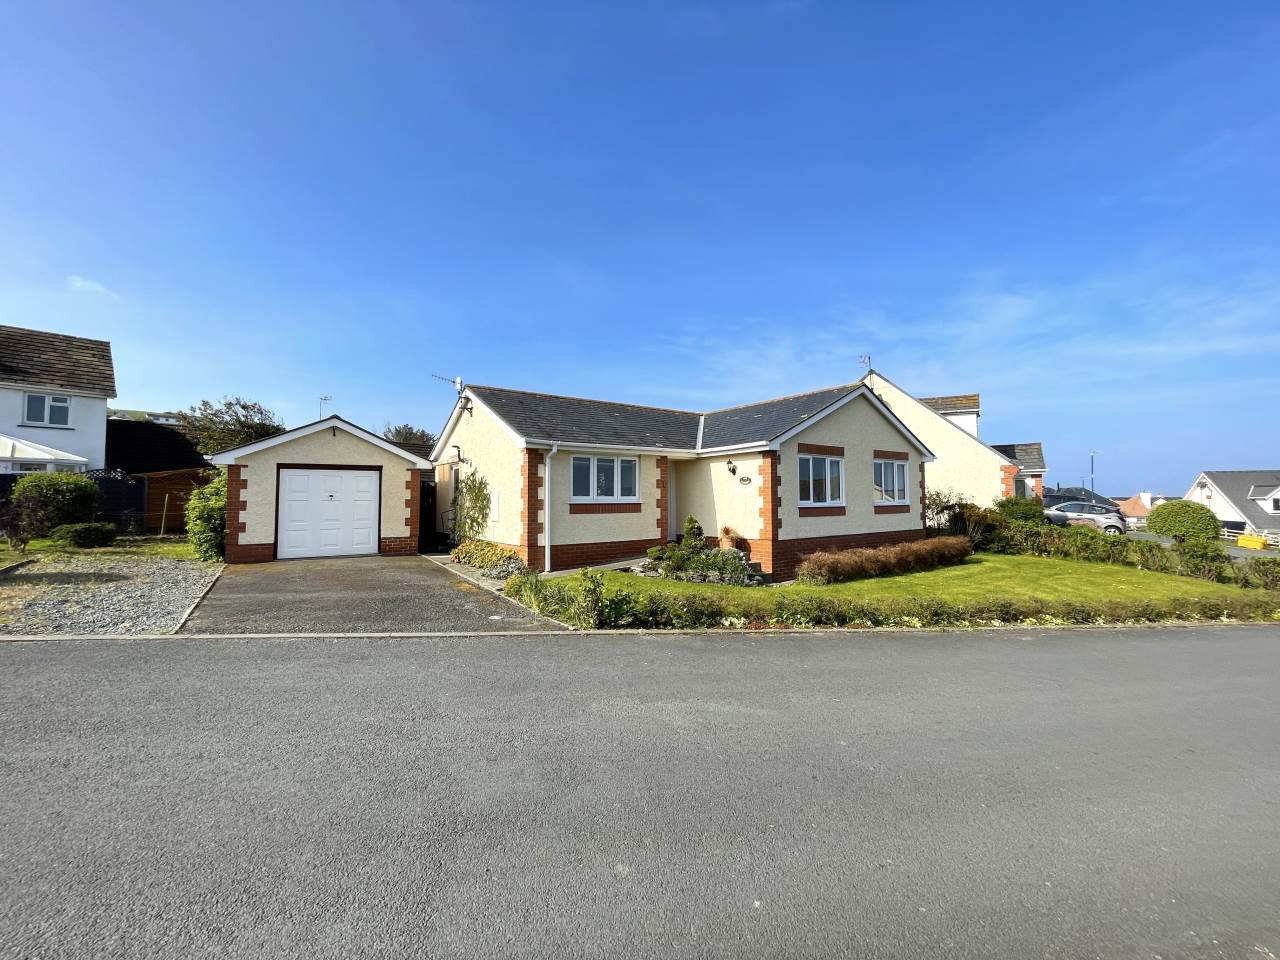 2 bed bungalow for sale in Clos Winifred, Borth, SY24